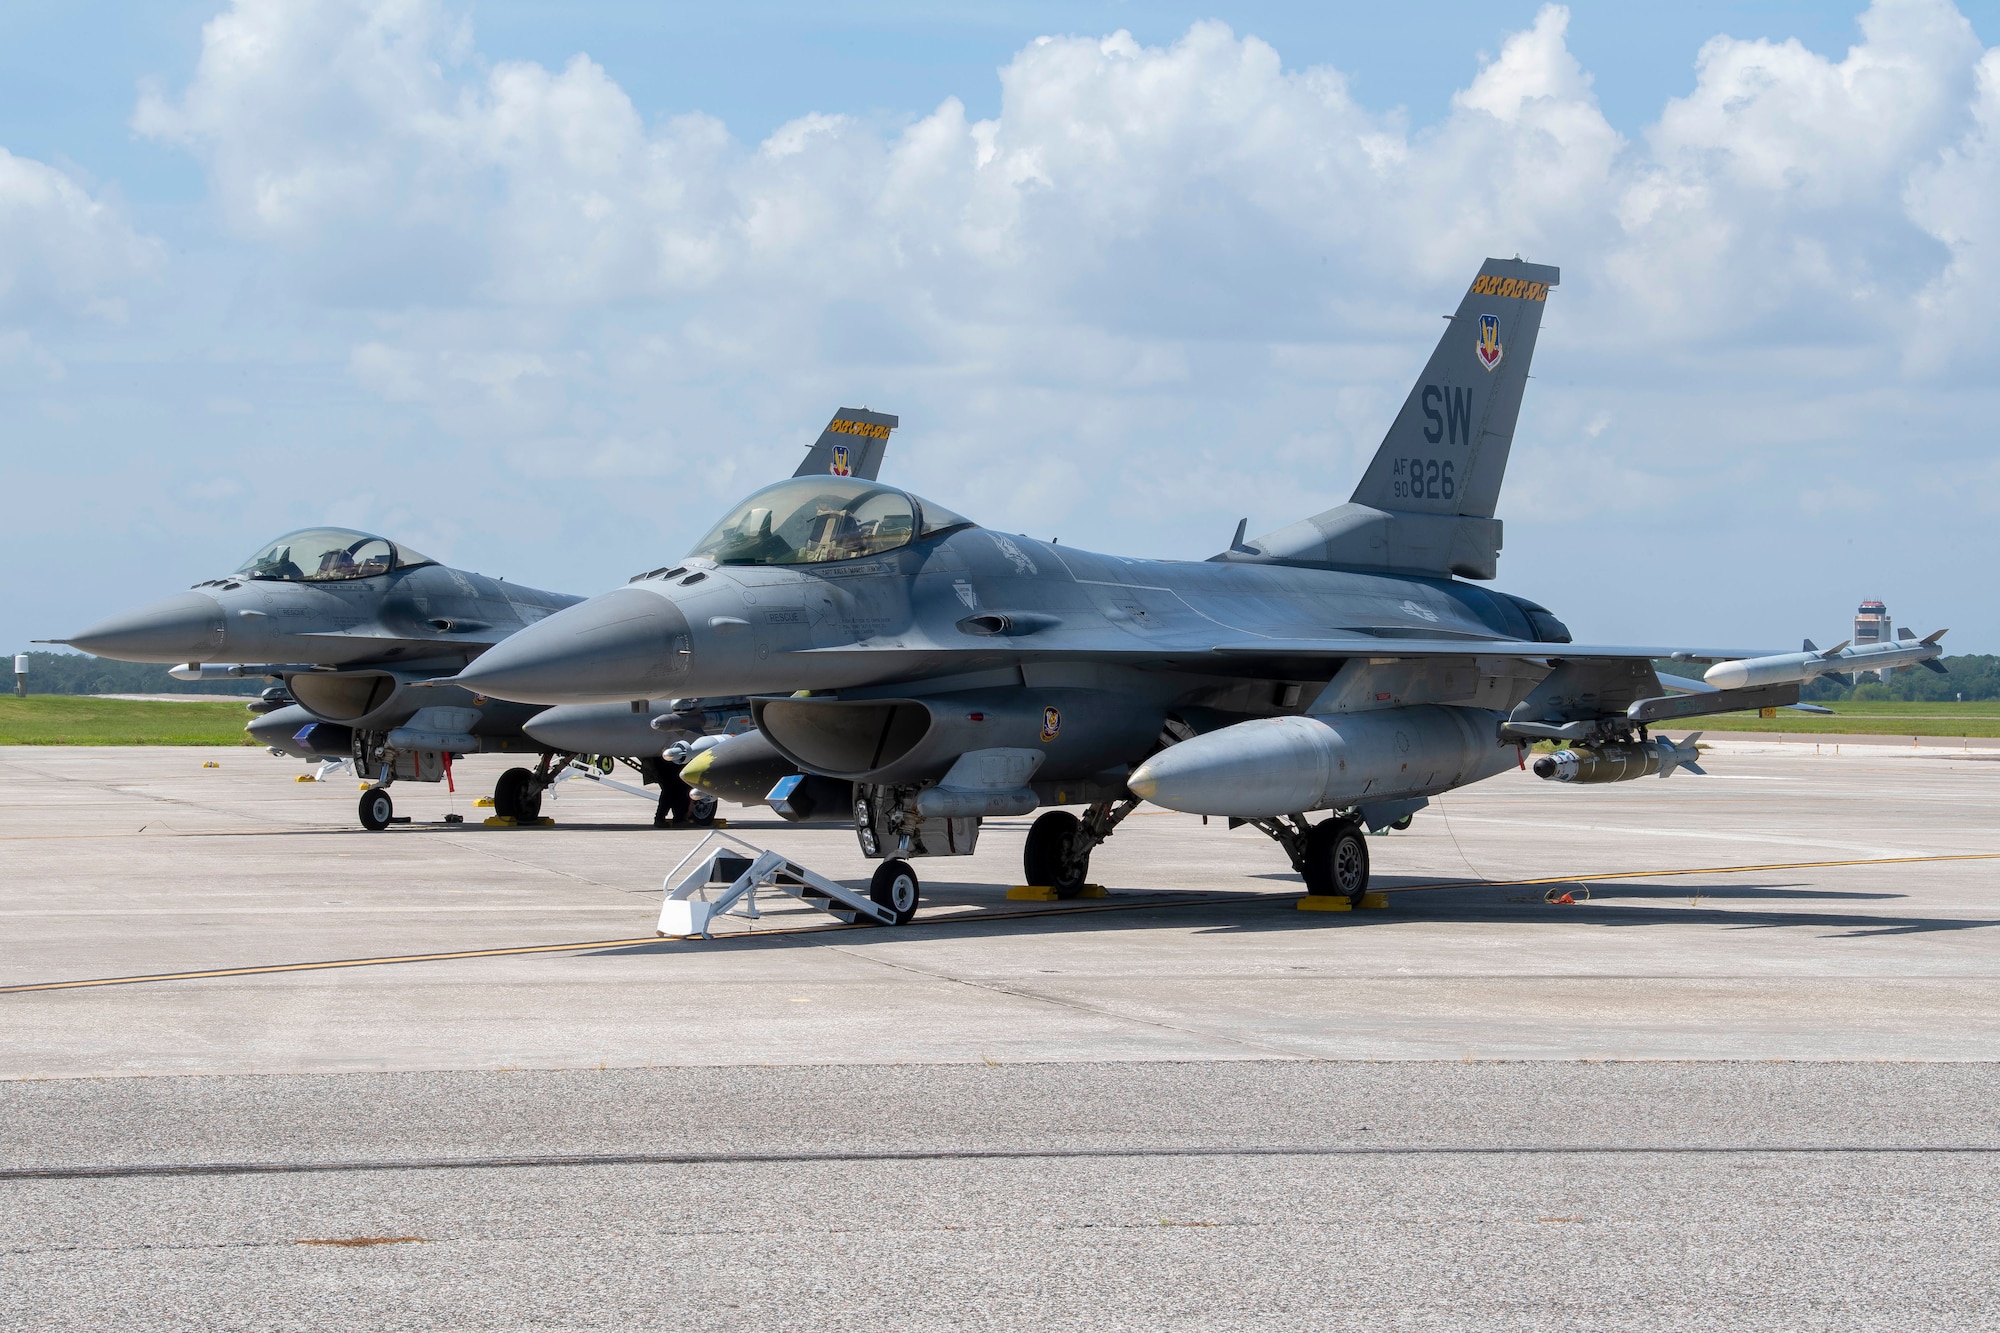 U.S. Air Force F-16 Fighting Falcon aircraft assigned to the 79th Fighter Squadron (FS), Shaw Air Force Base, South Carolina, sits parked on the flight line at MacDill Air Force Base, Florida, Sept. 8, 2021.